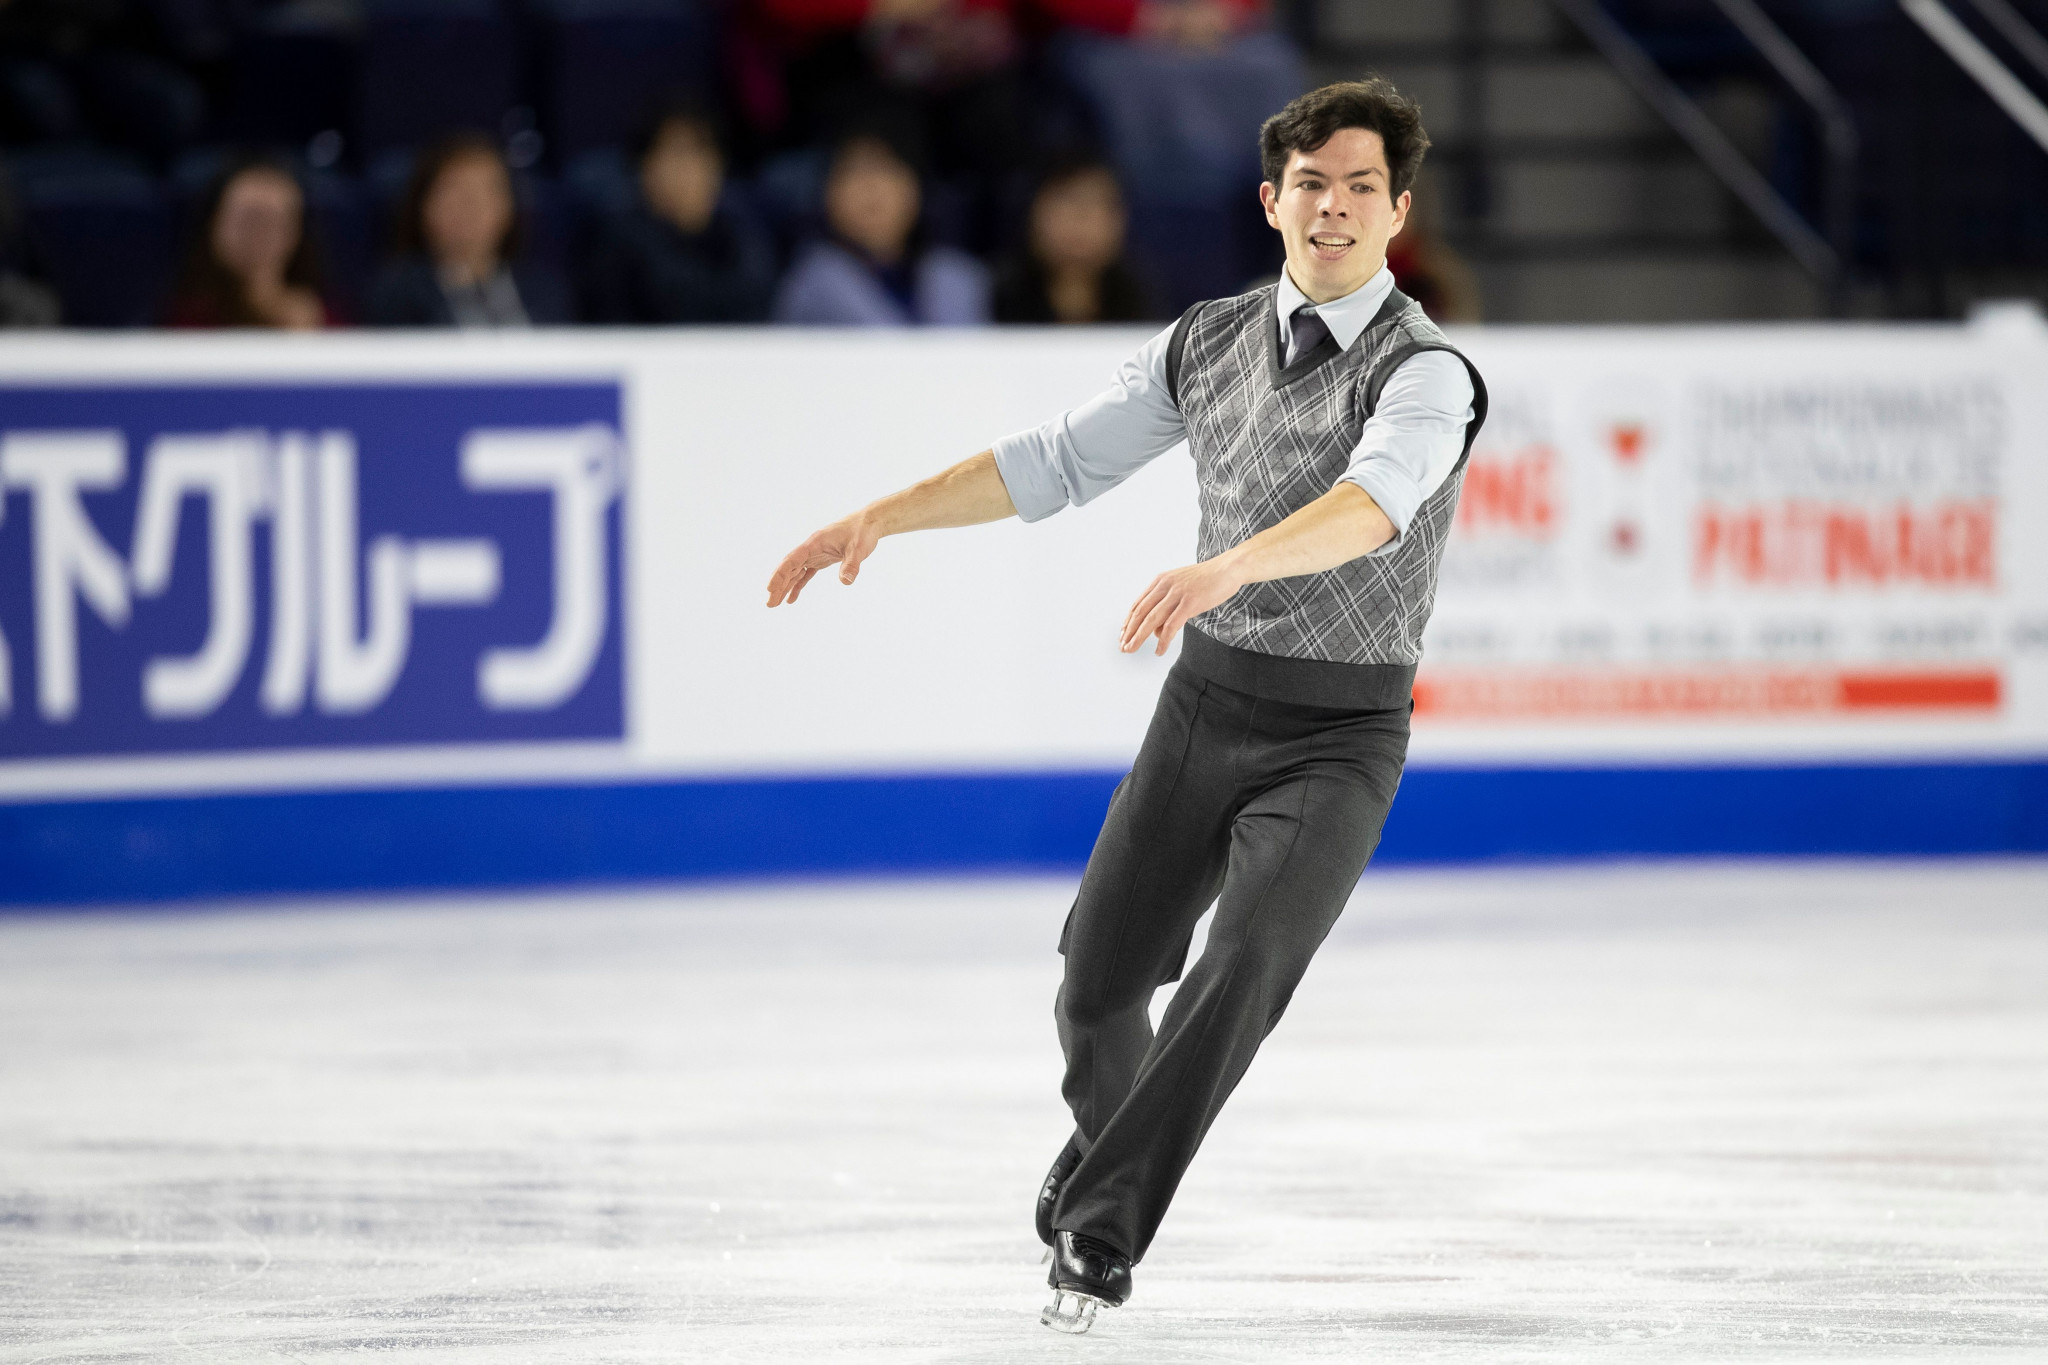 Keegan Messing delighted the home crowd by topping the men’s short programme standings on day one of Skate Canada in Laval ©Getty Images